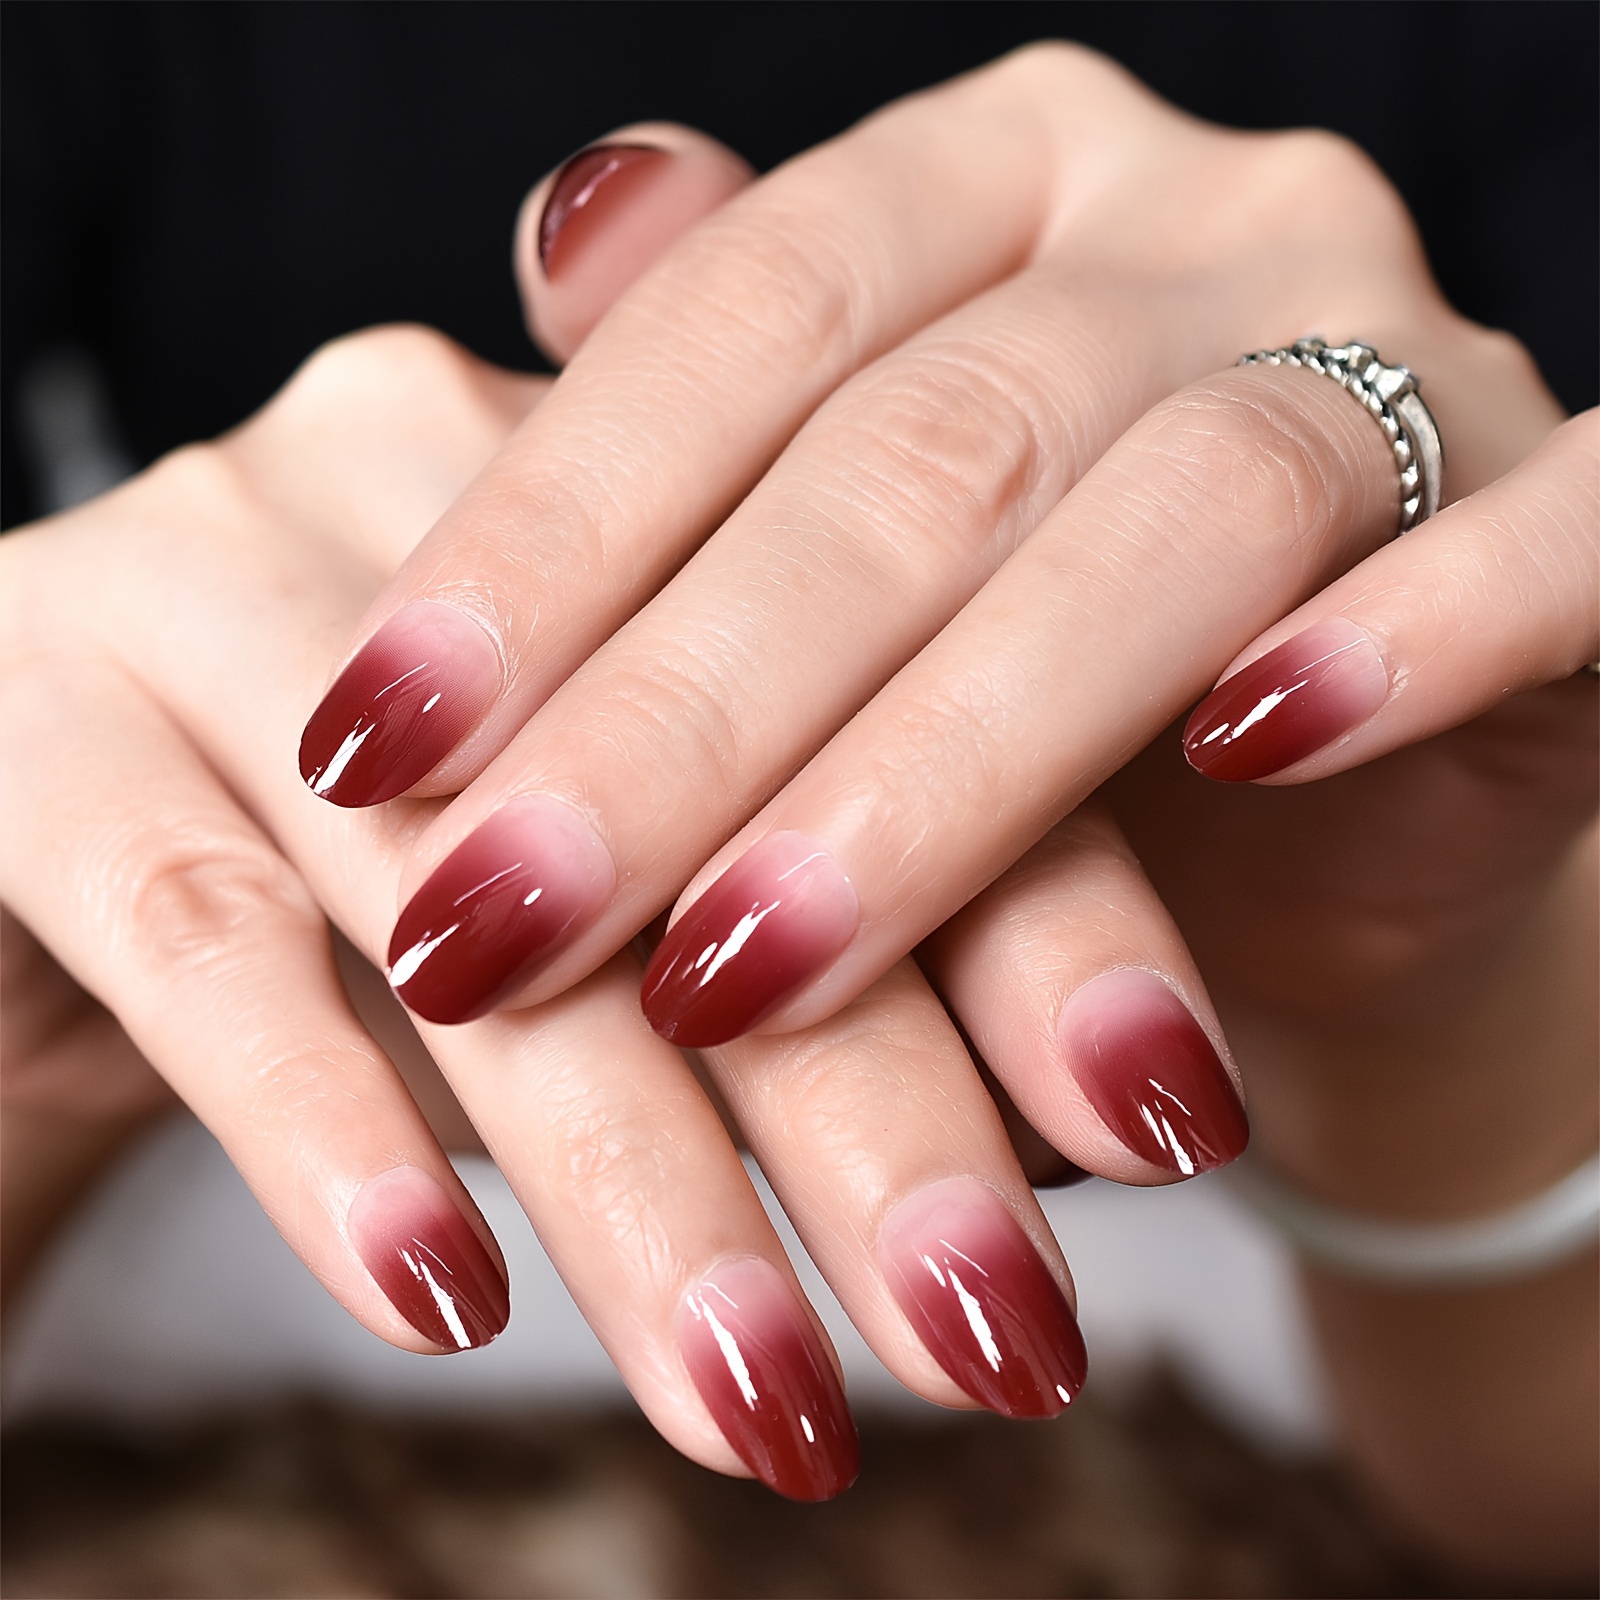 Handmade Black Deep Red Ombre New Year Christmas Press on Nails